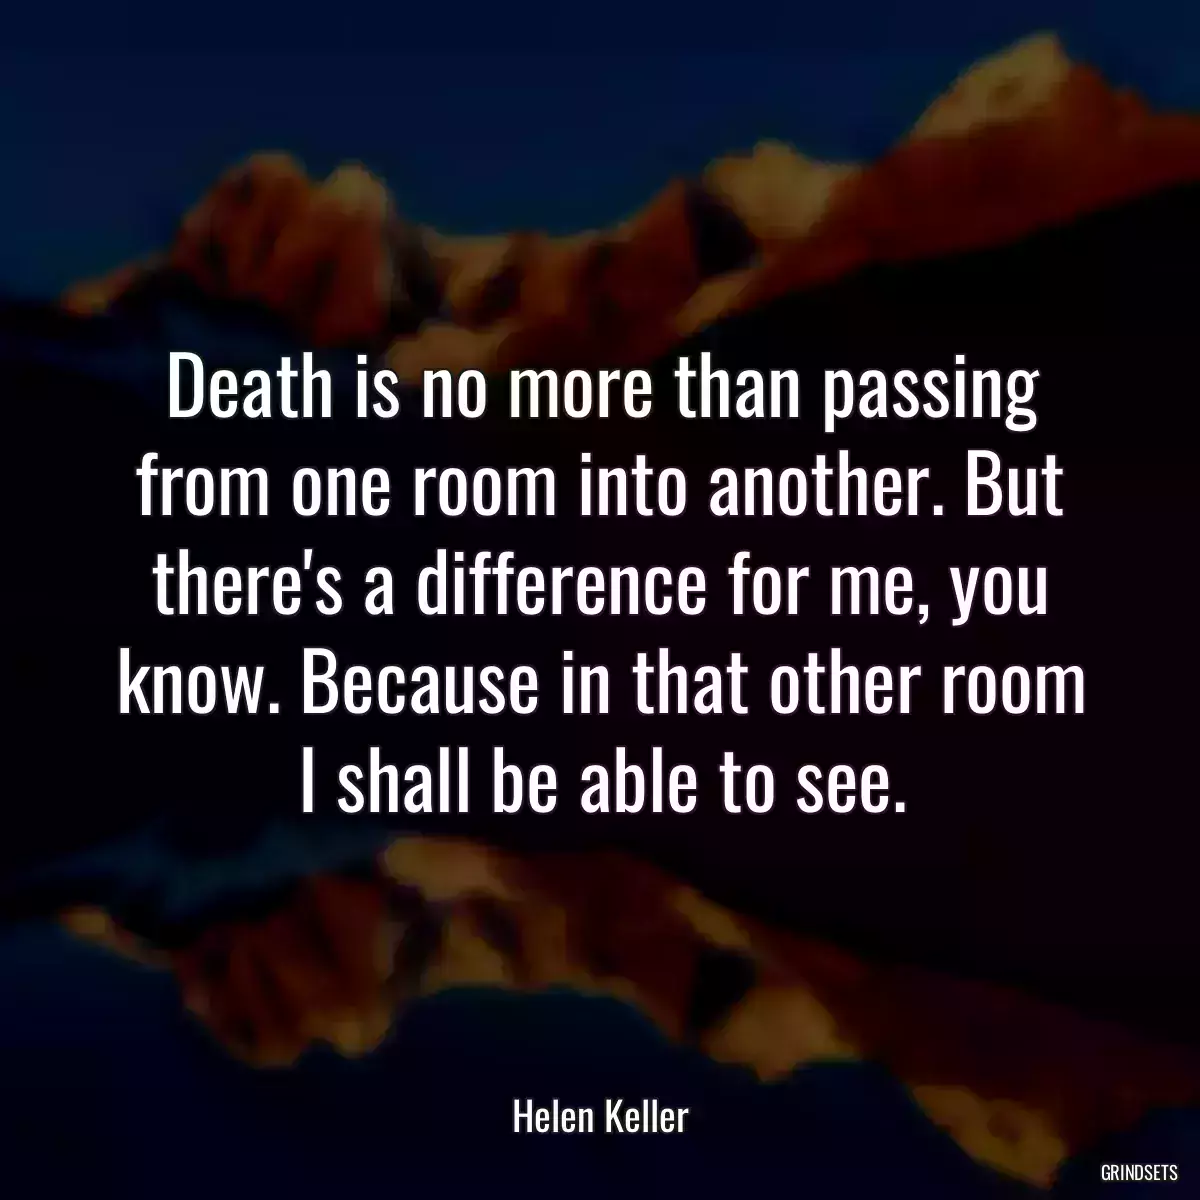 Death is no more than passing from one room into another. But there\'s a difference for me, you know. Because in that other room I shall be able to see.